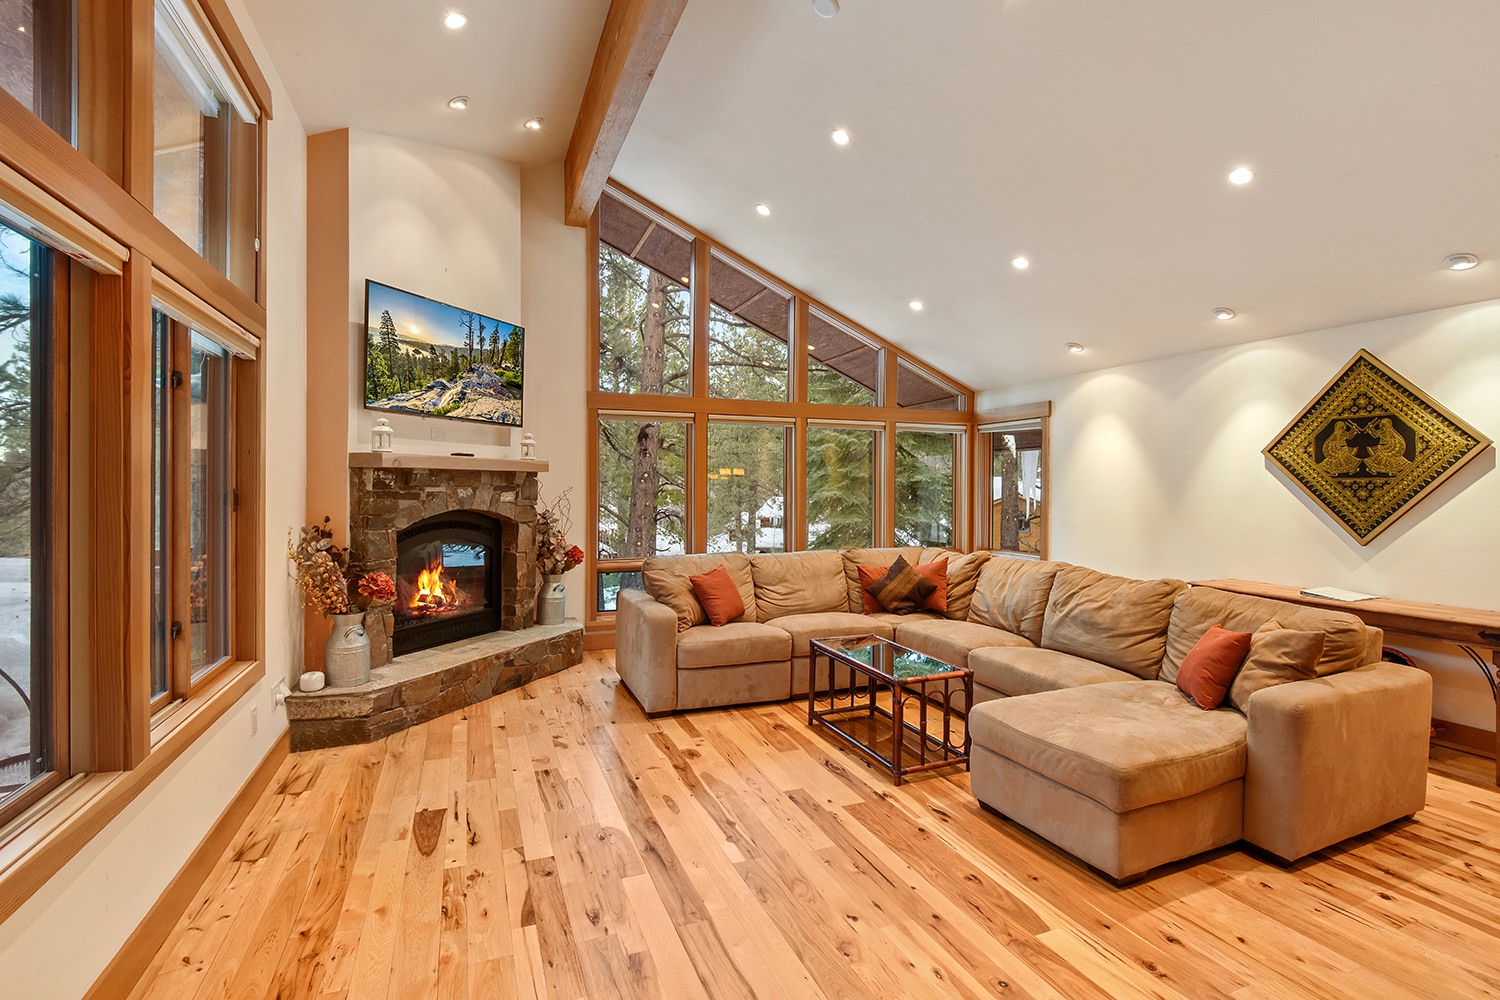 Spacious living space with Smart TV, and fireplace